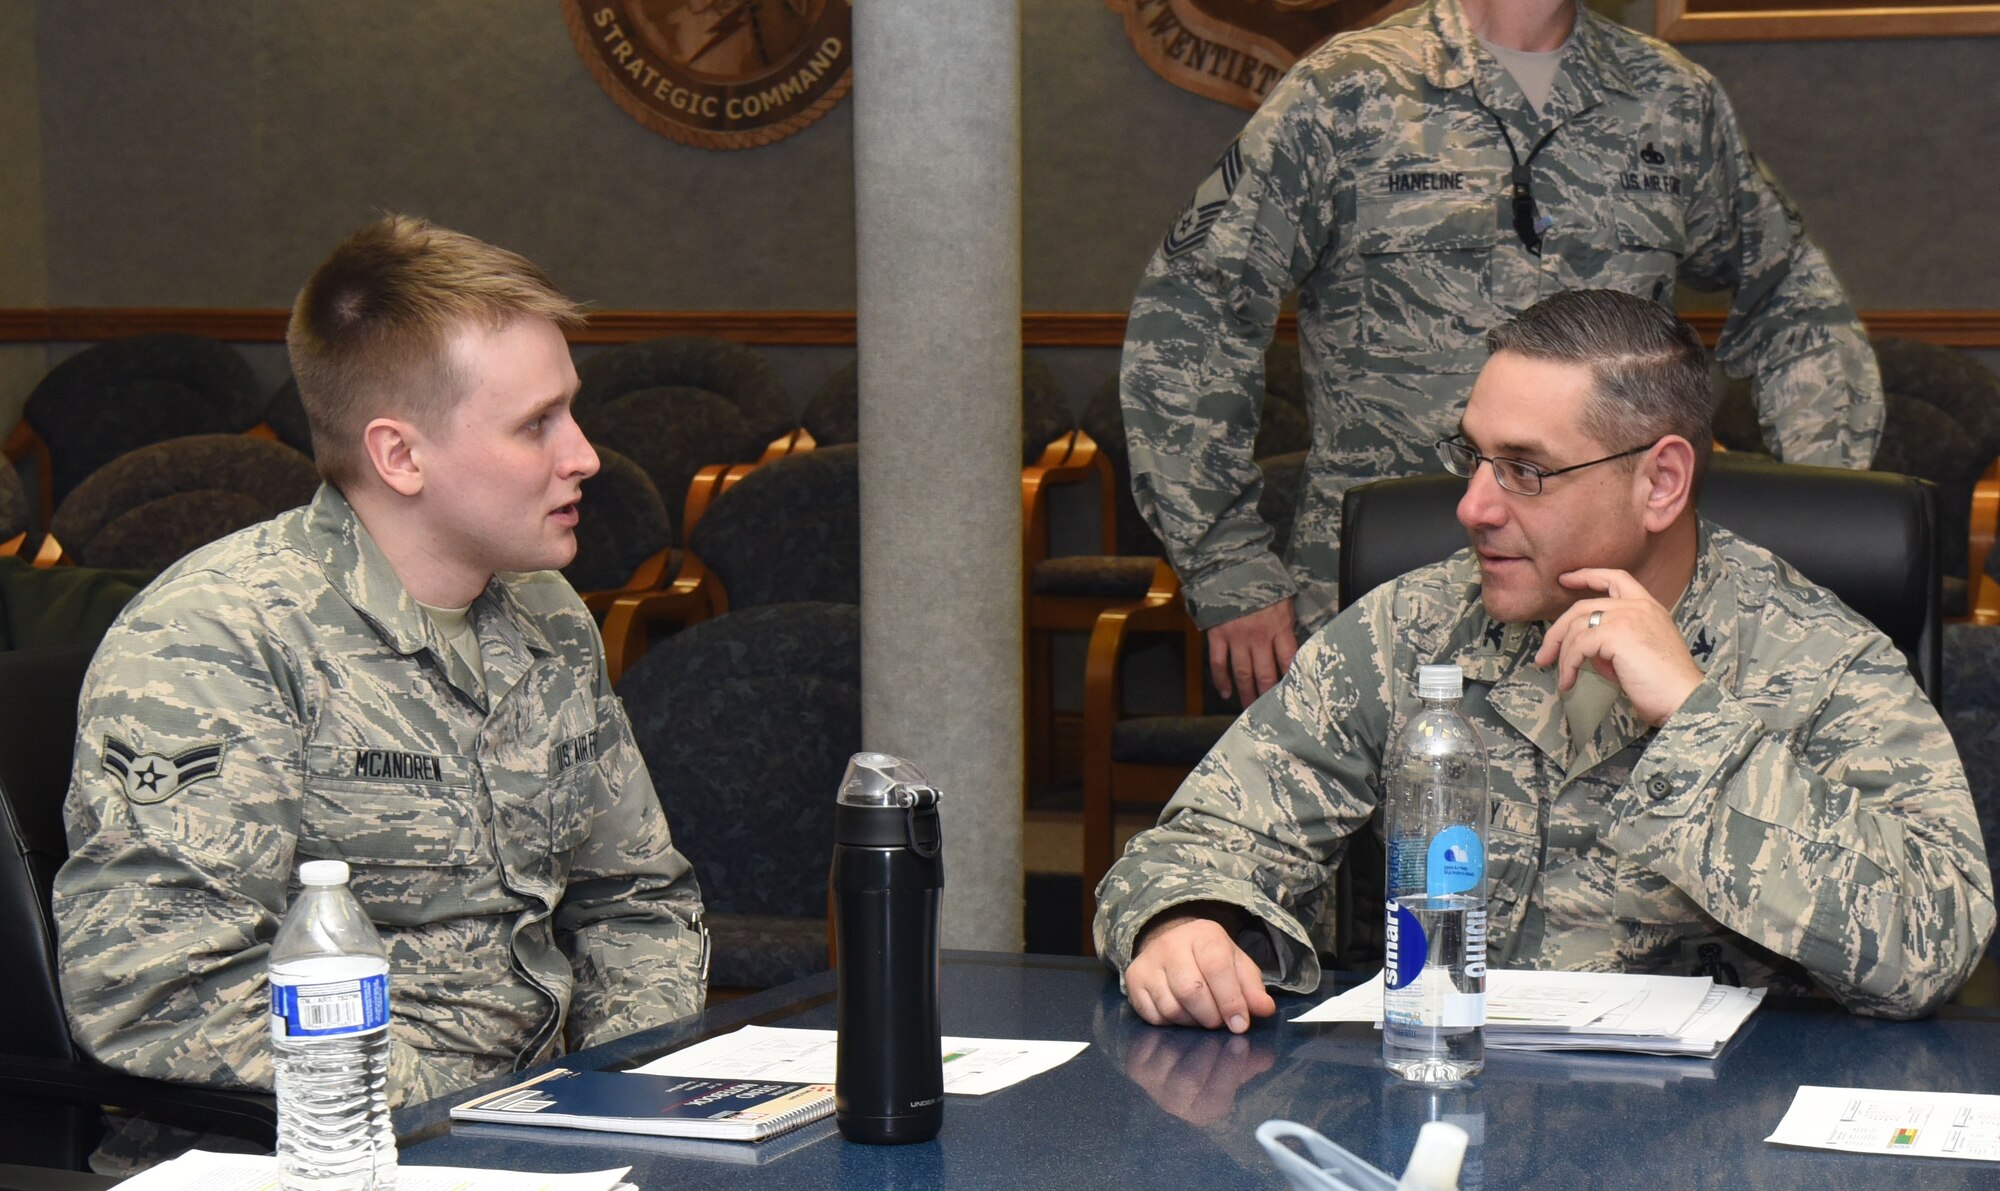 Col. Stephen Kravitsky, 90th Missile Wing commander, talks to Airman 1st Class Joseph McAndrew, 90th Logistics Readiness Squadron traffic management technician, after a meeting in the wing conference room at F.E. Warren Air Force Base, Wyo., Jan. 11, 2017. Attending this meeting and shadowing Kravitsky for the day gave McAndrew insight into how the wing operates. (U.S. Air Force photo by Airman 1st Class Breanna Carter)